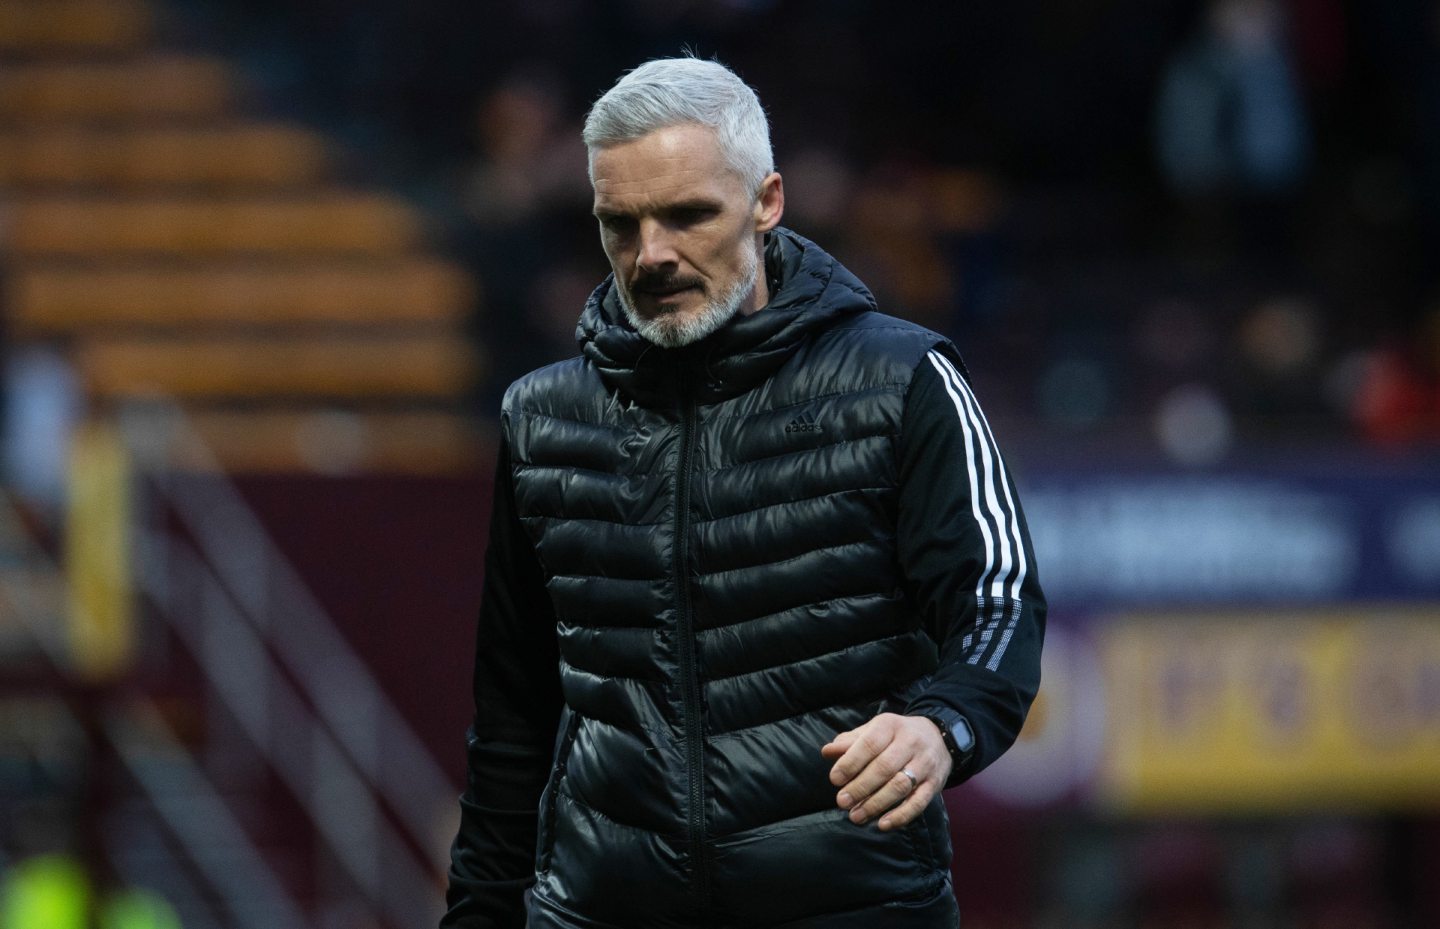 Aberdeen Manager Jim Goodwin during the match against Motherwell.